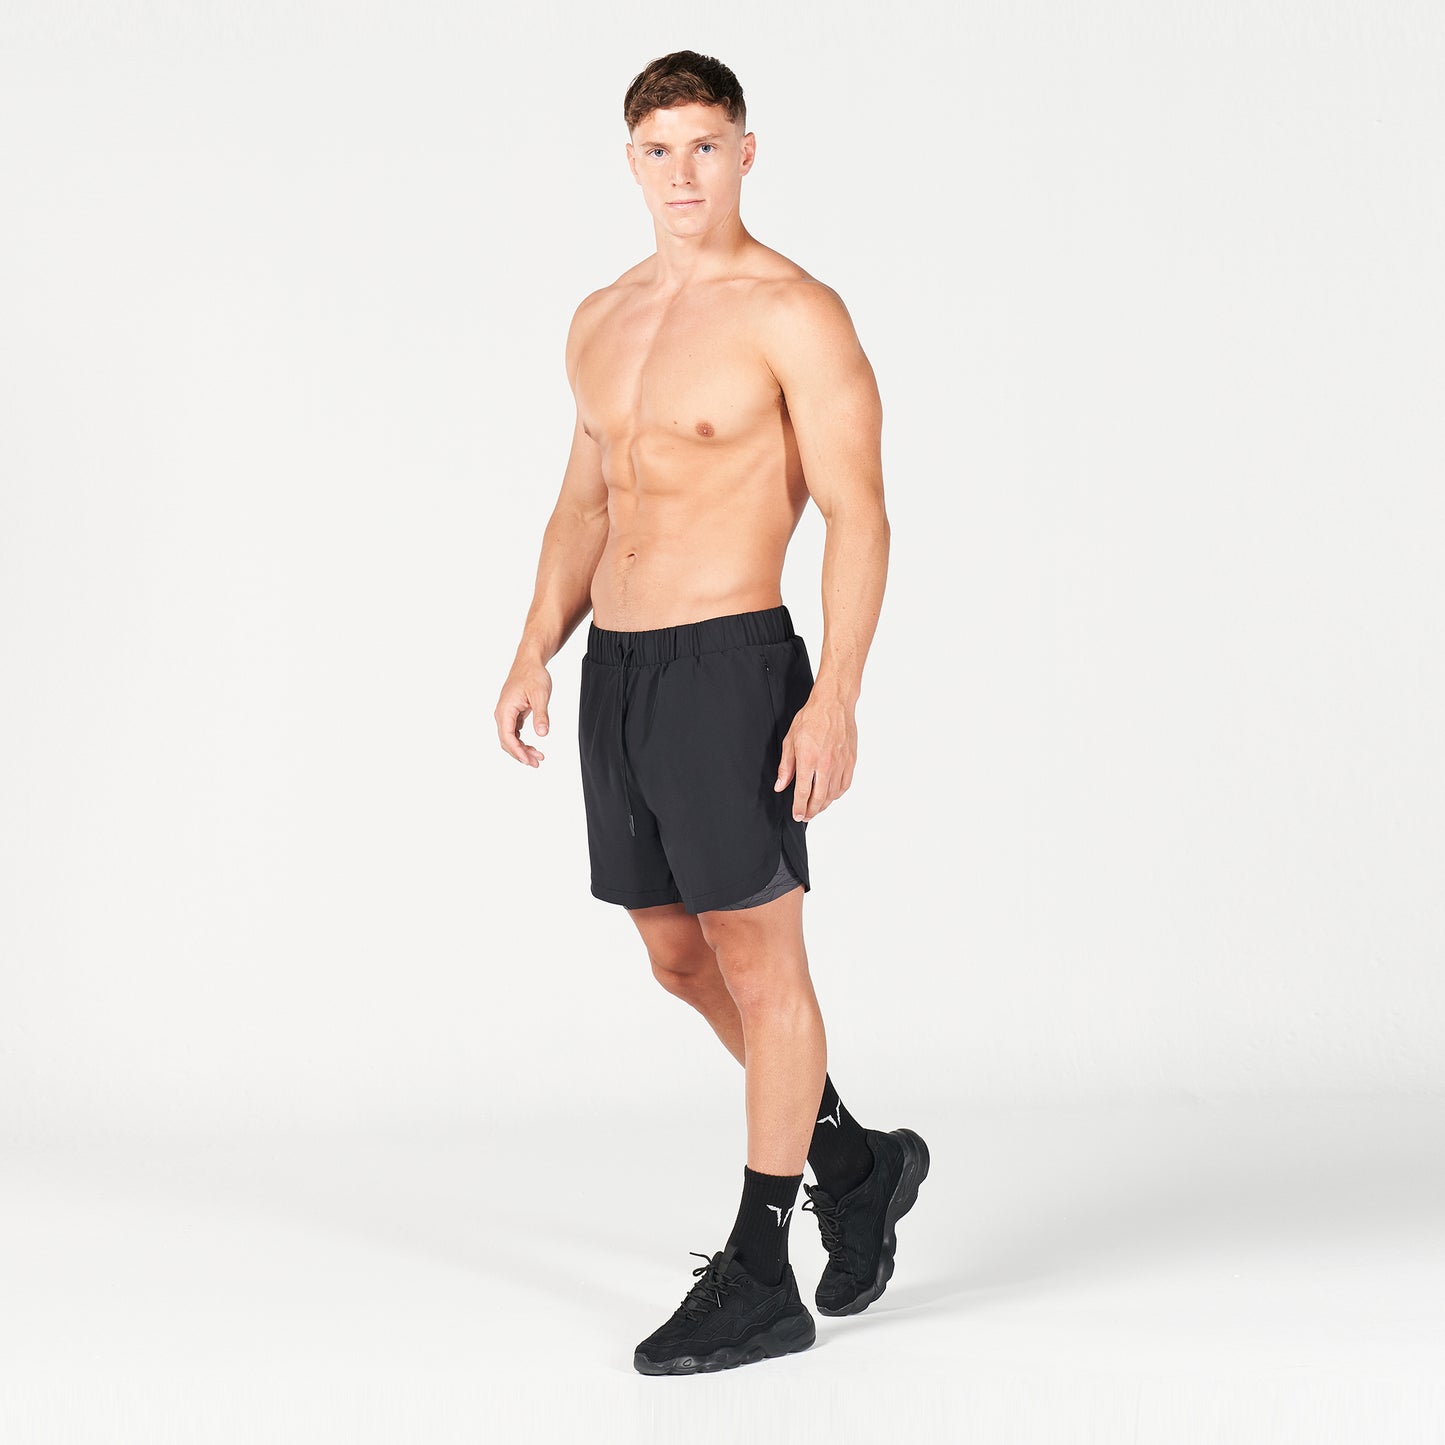 squatwolf-gym-wear-limitless-2-in-1-5-shorts-black-workout-short-for-men